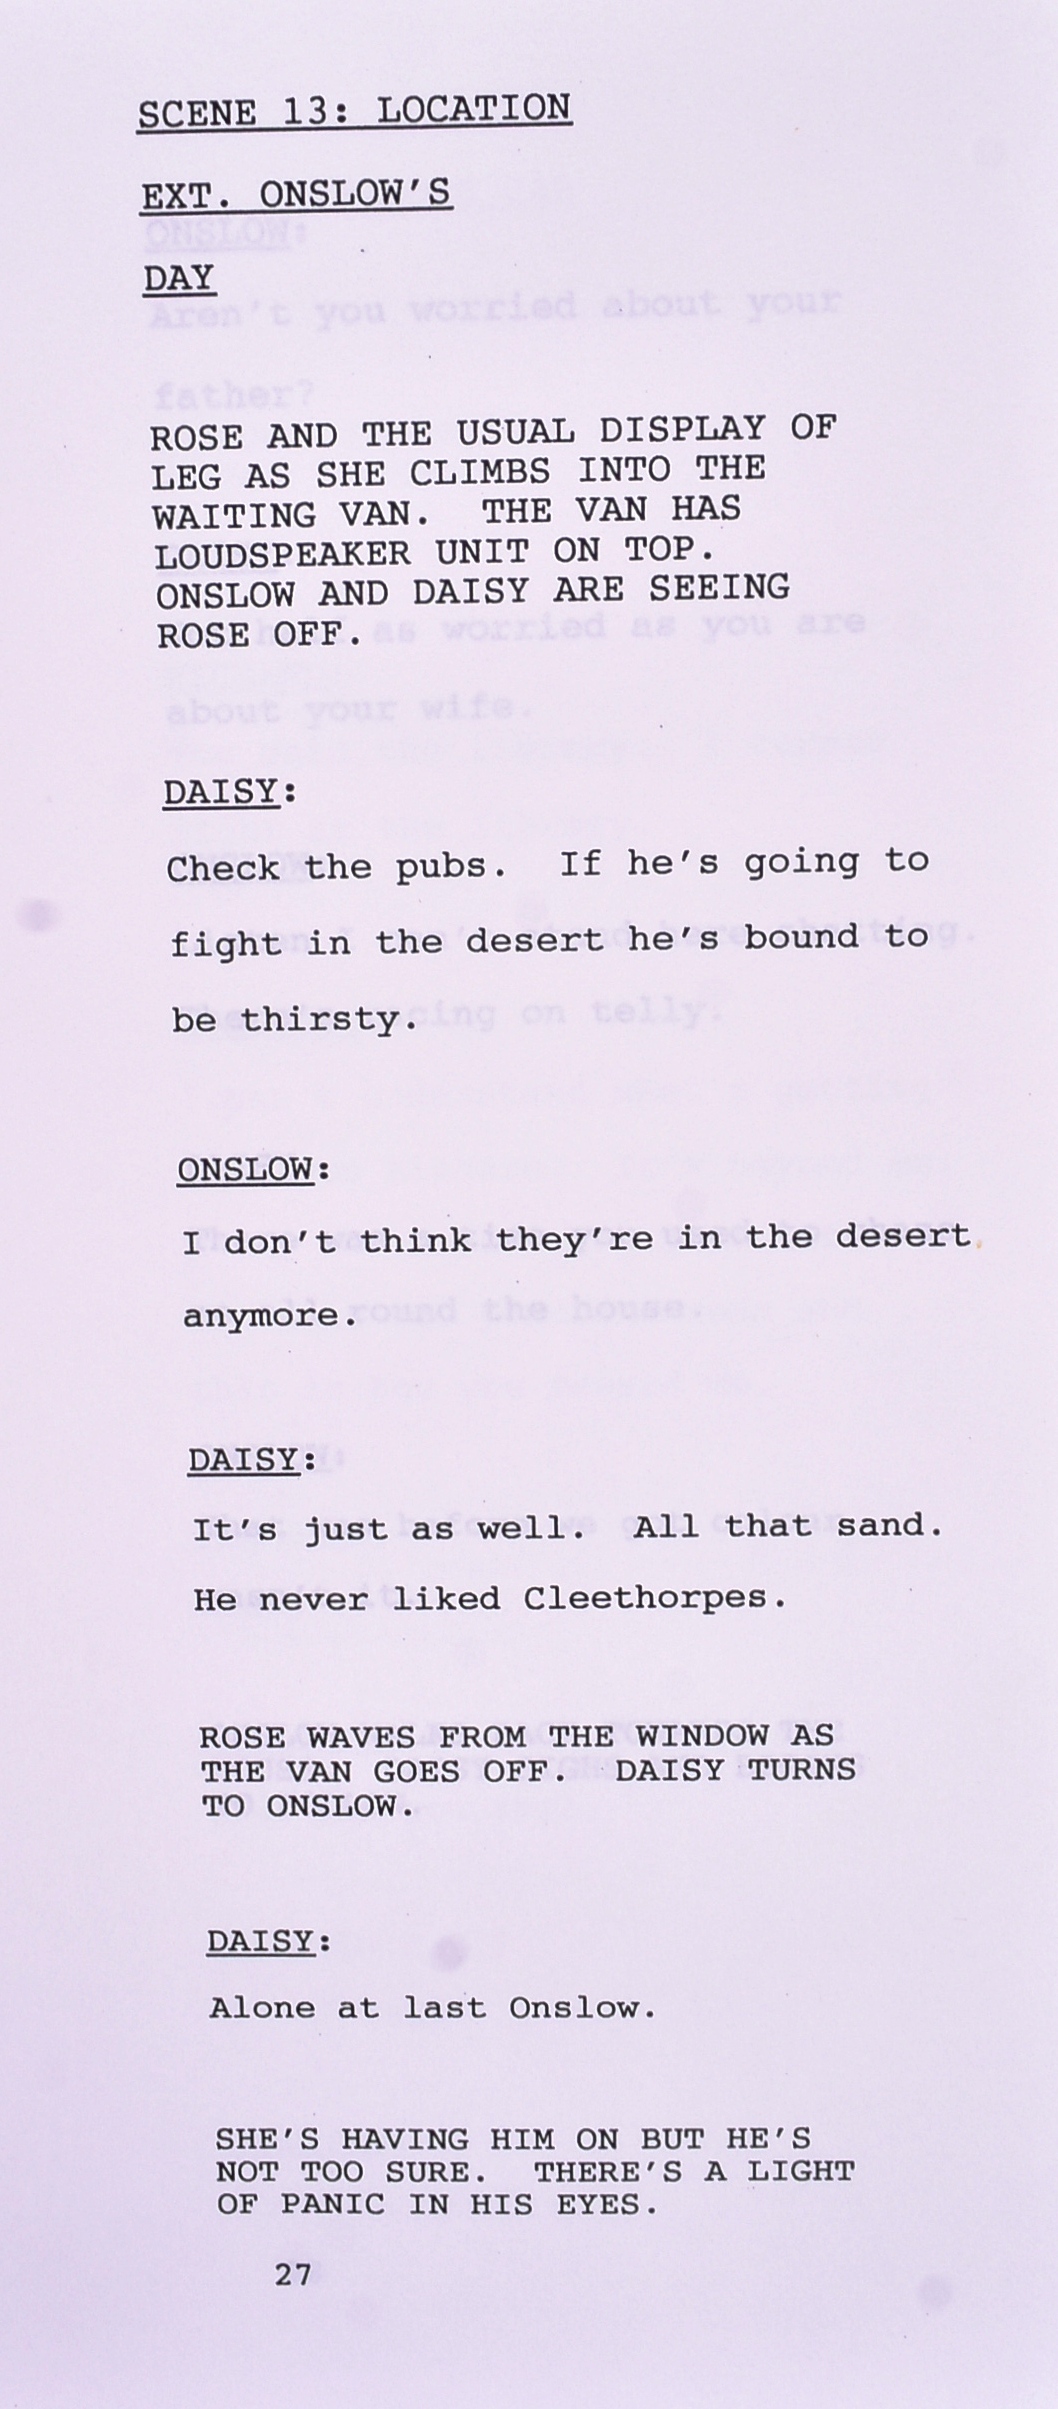 ORIGINAL KEEPING UP APPEARANCES PRODUCTION USED SCRIPT - Image 5 of 5